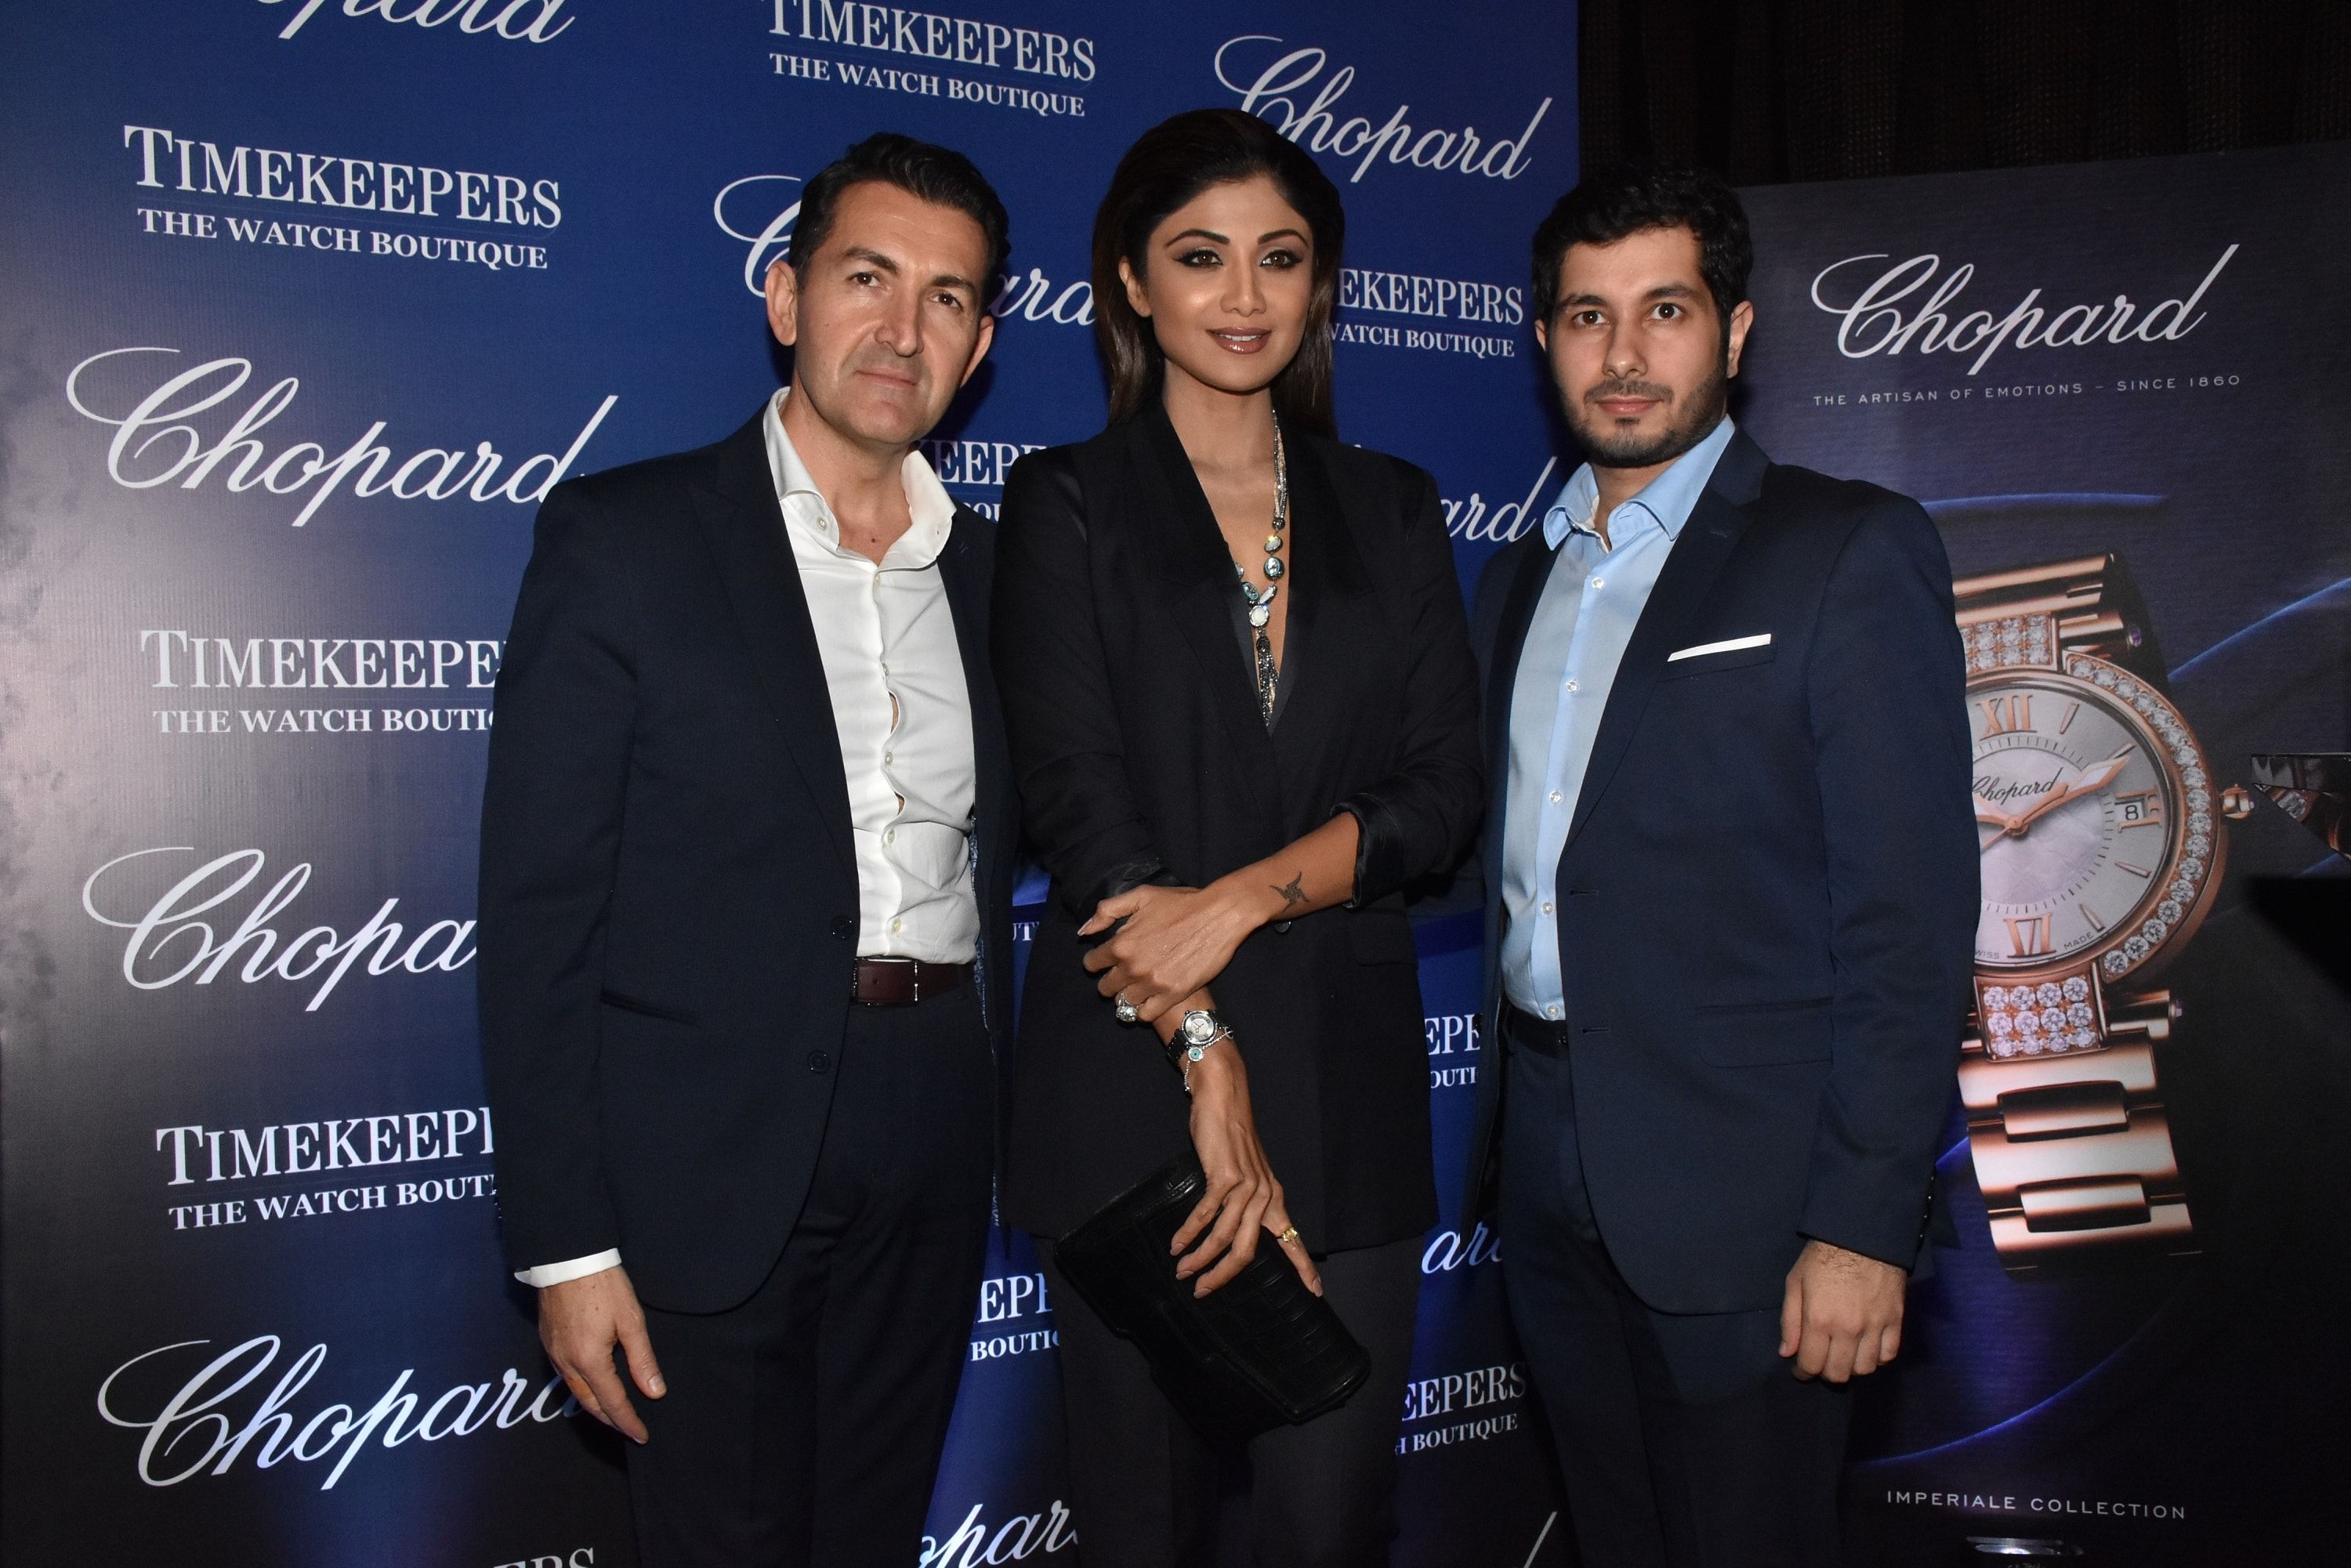 Chopard celebrated their 25th Anniversary with a cocktail hosted by Timekeepers